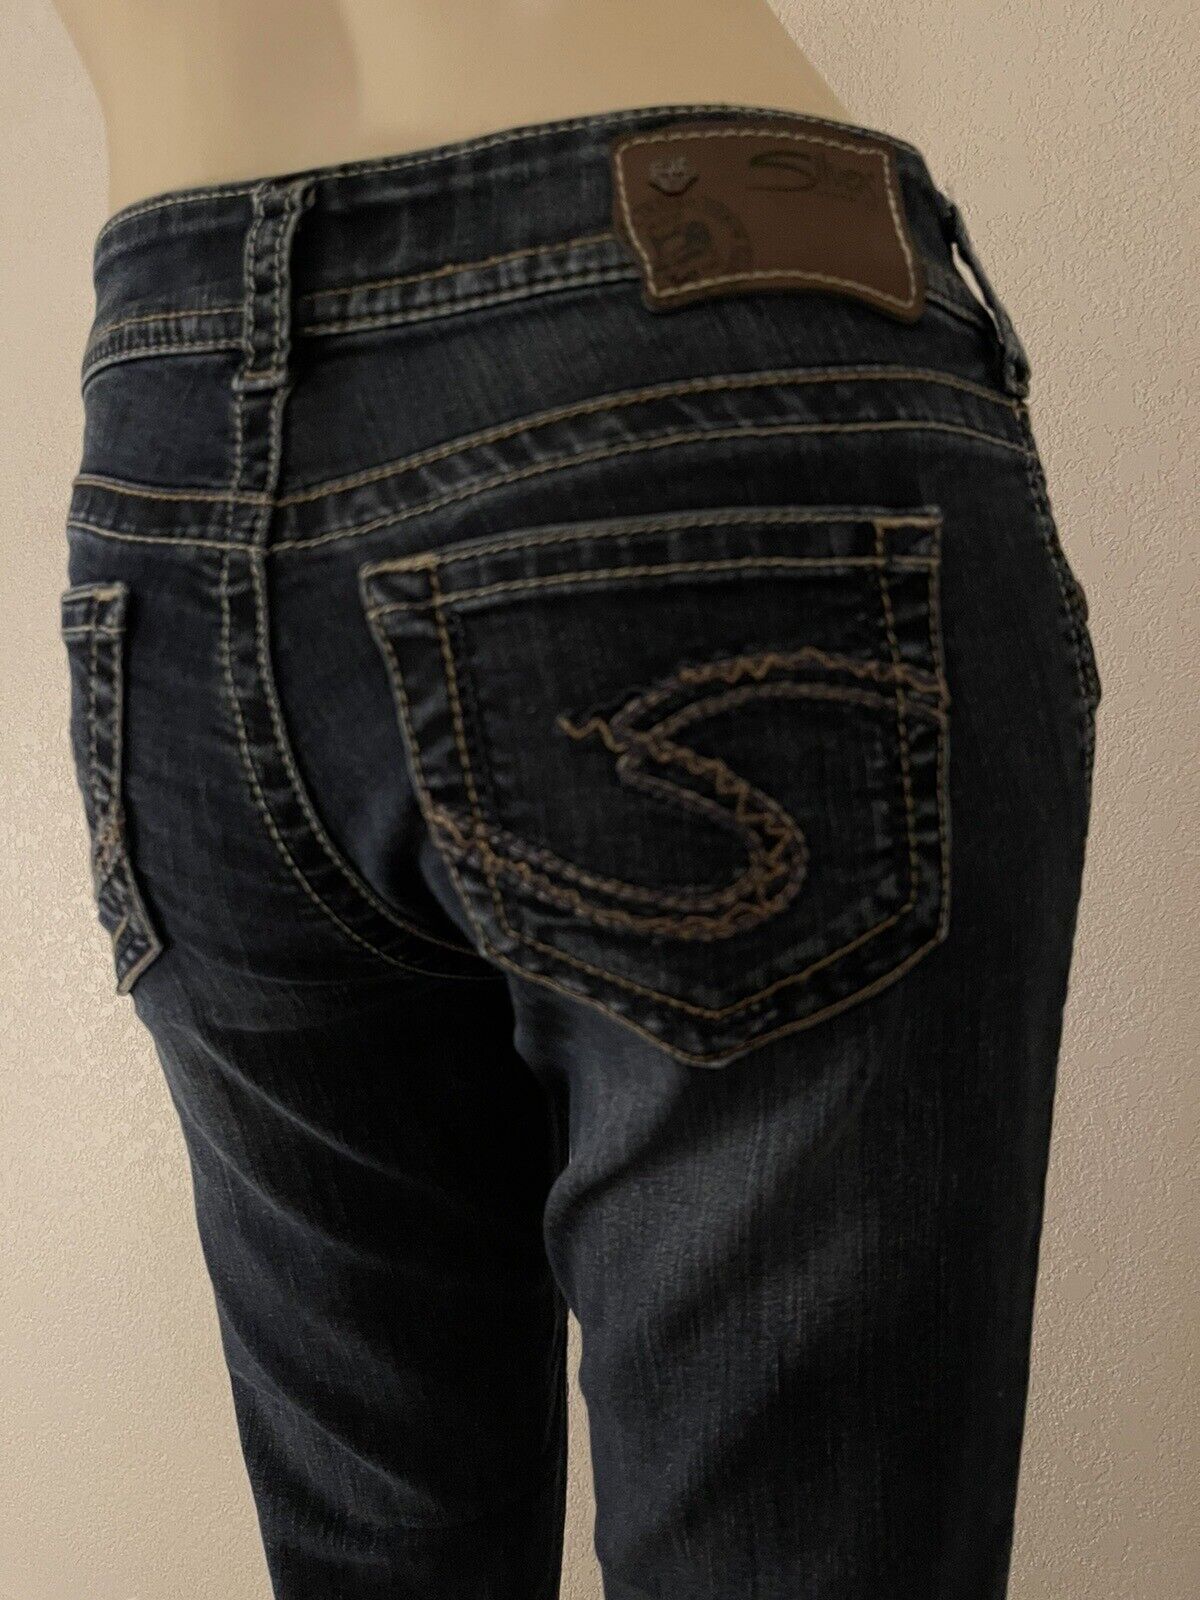 SILVER BOOTCUT WOMENS JEANS. NICE. 26x32.